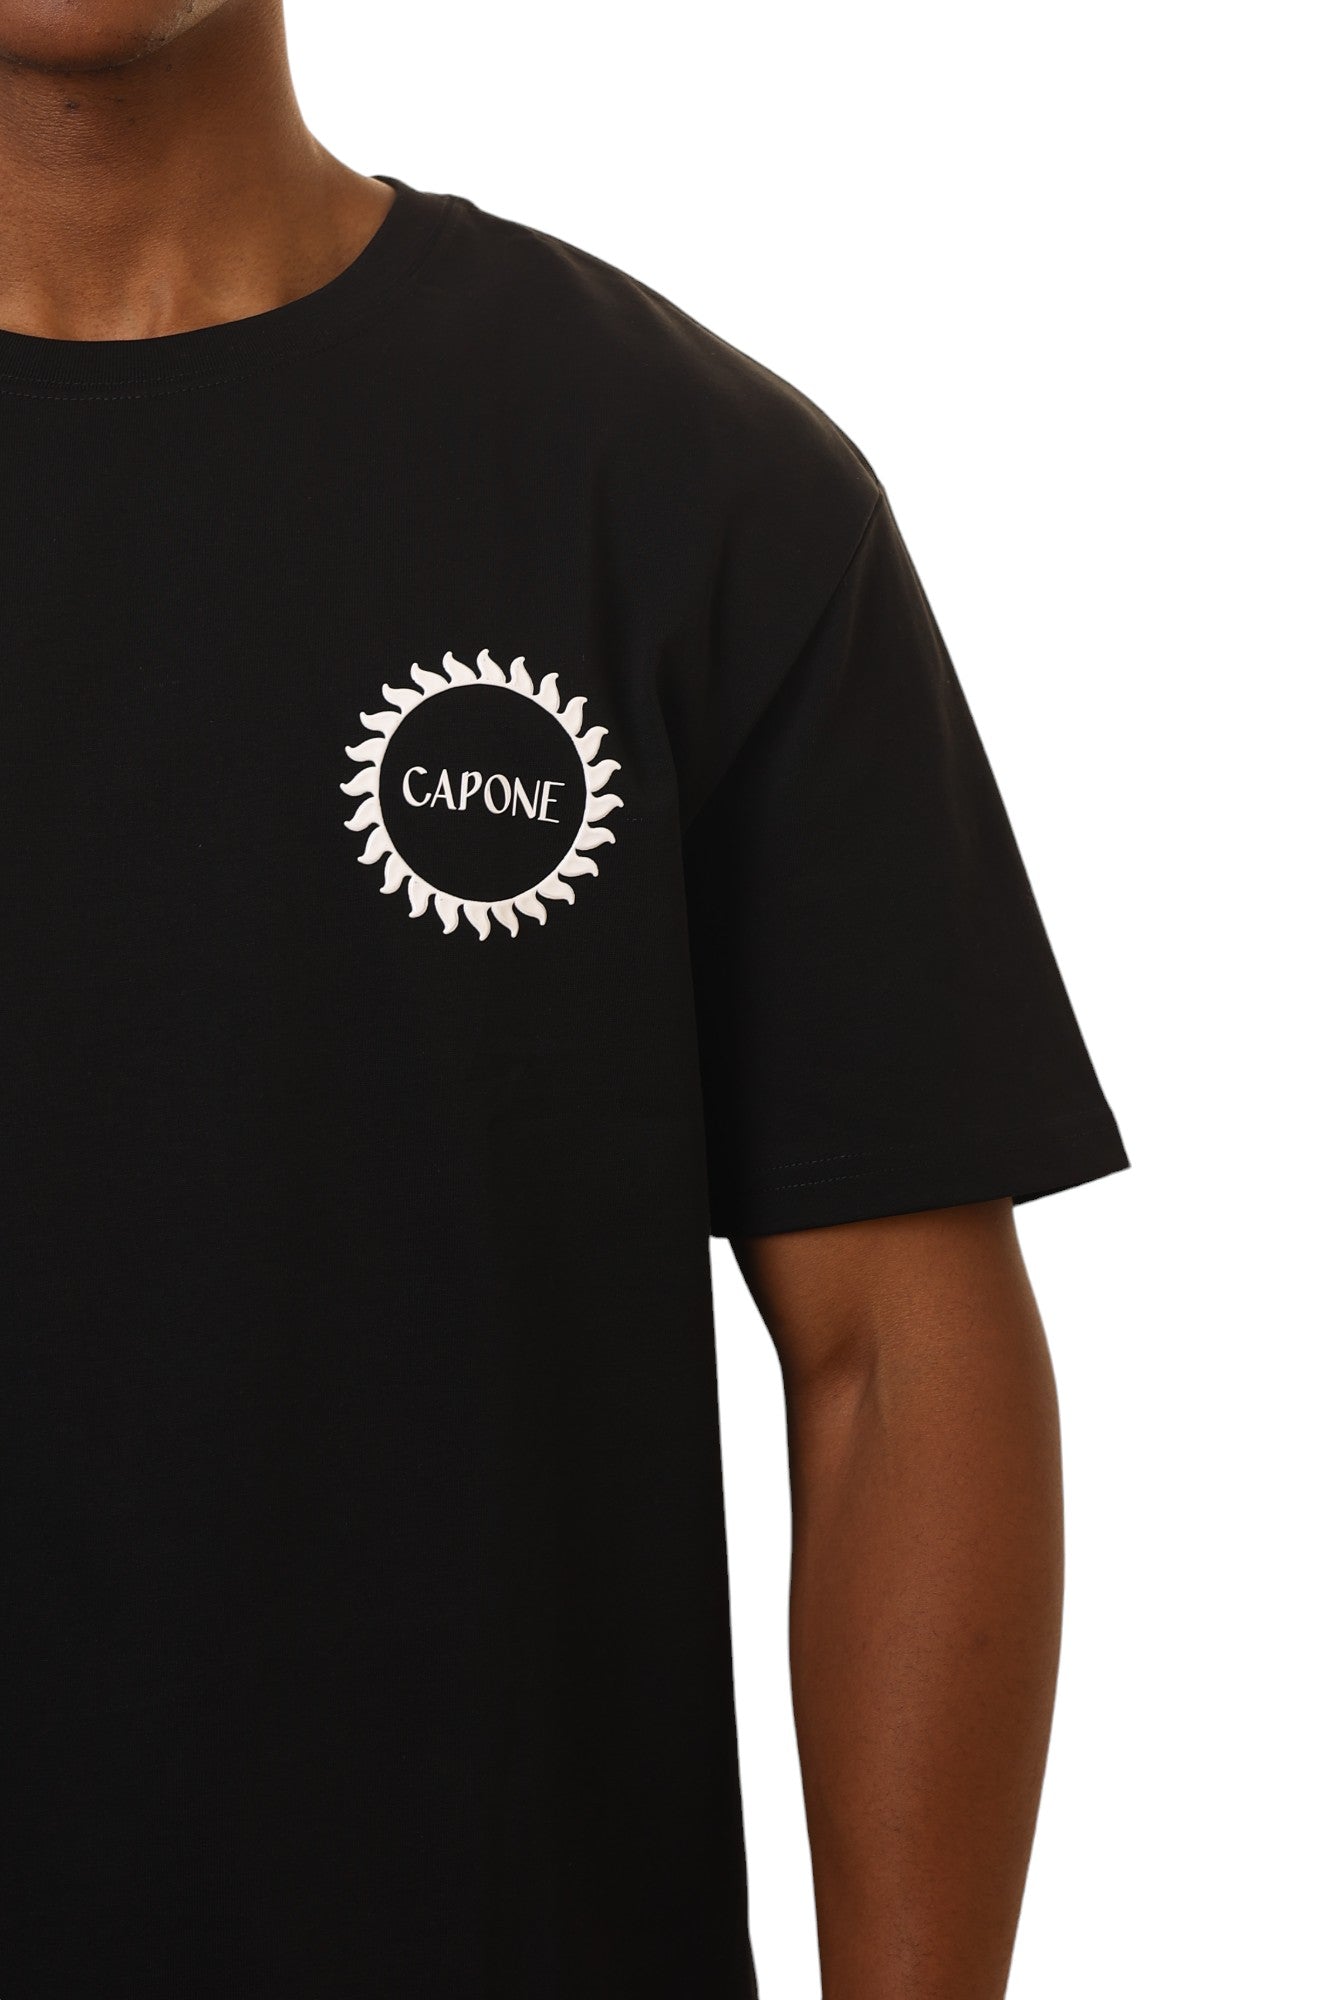 Capone T-Shirt Capone Map Embossed Black